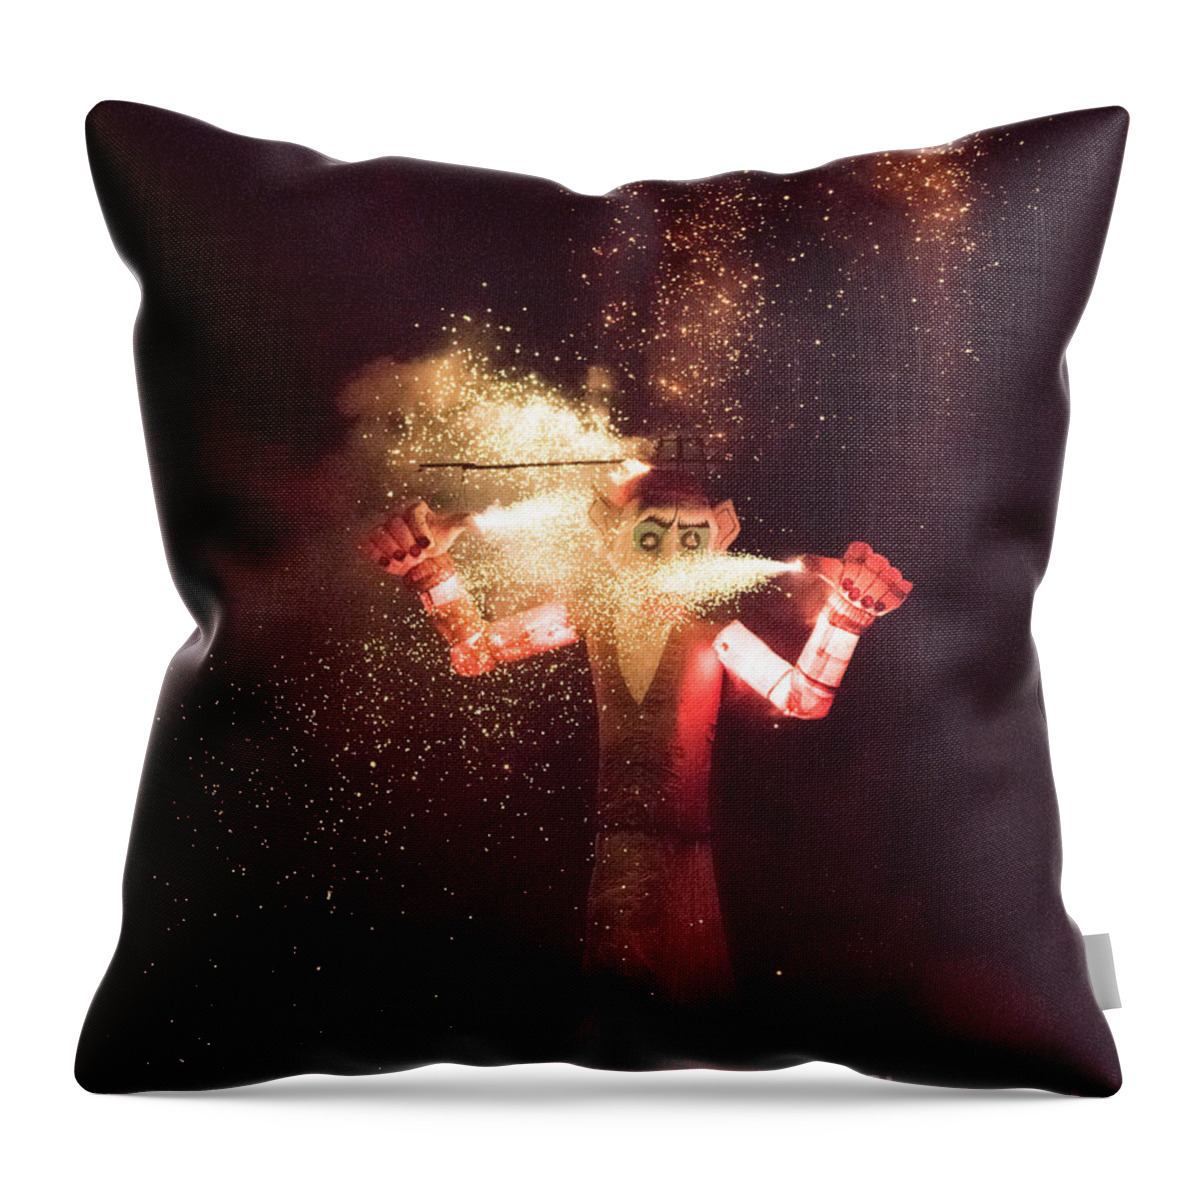 Natanson Throw Pillow featuring the photograph Zozobra Fireworks by Steven Natanson